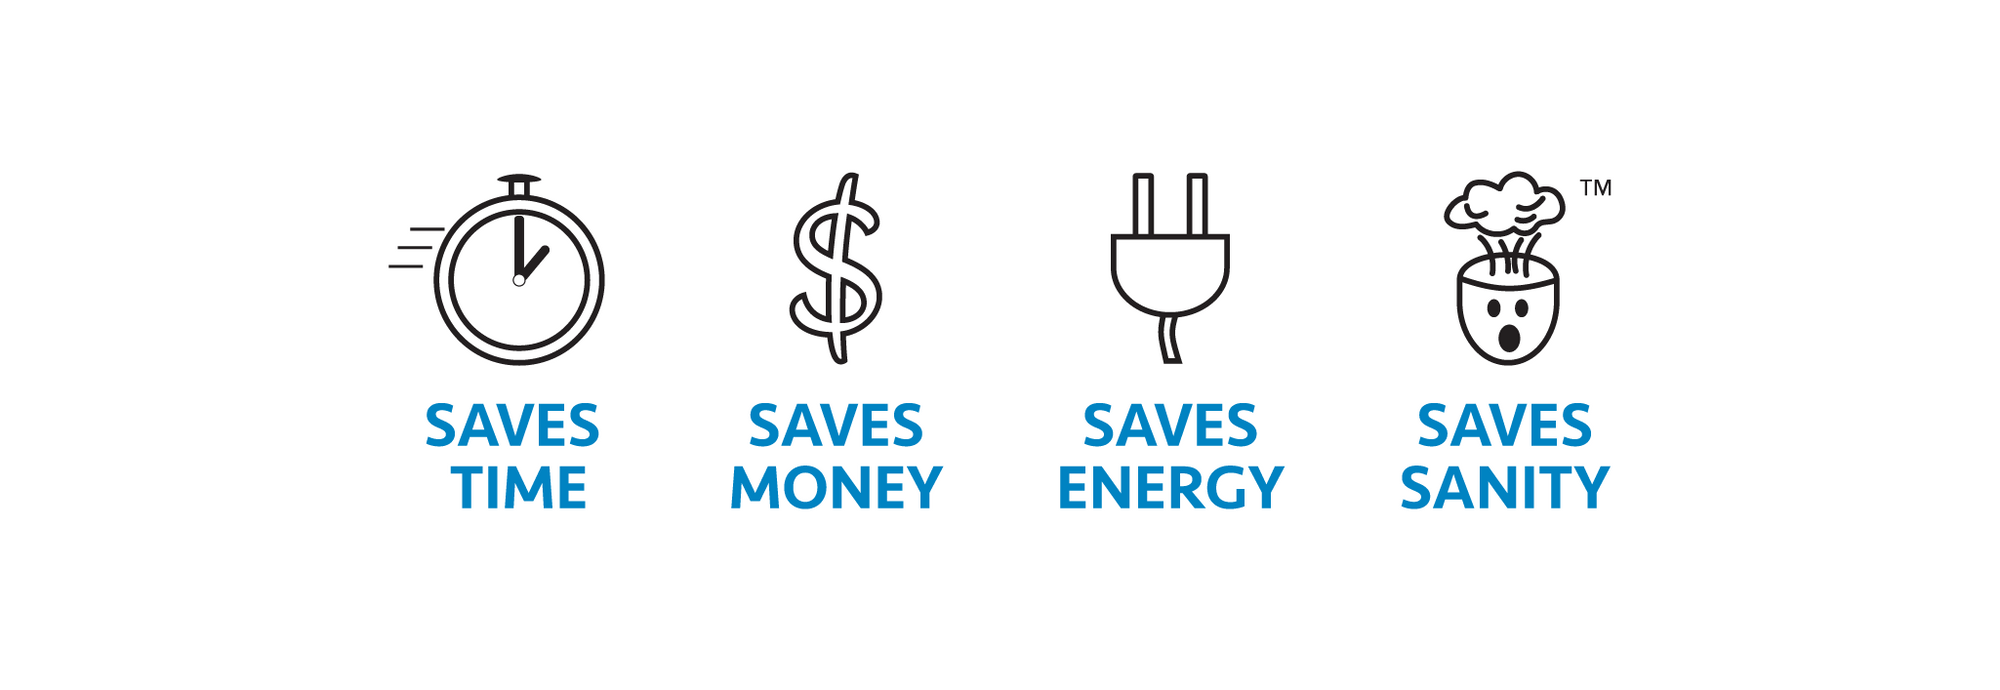 Wad-Free Saves Time, Money, Energy, and Sanity Graphic Icons. Time is depicted with a clock, Money with a dollar sign, Energy with an electric plug, and Sanity with a cartoon character's head exploding